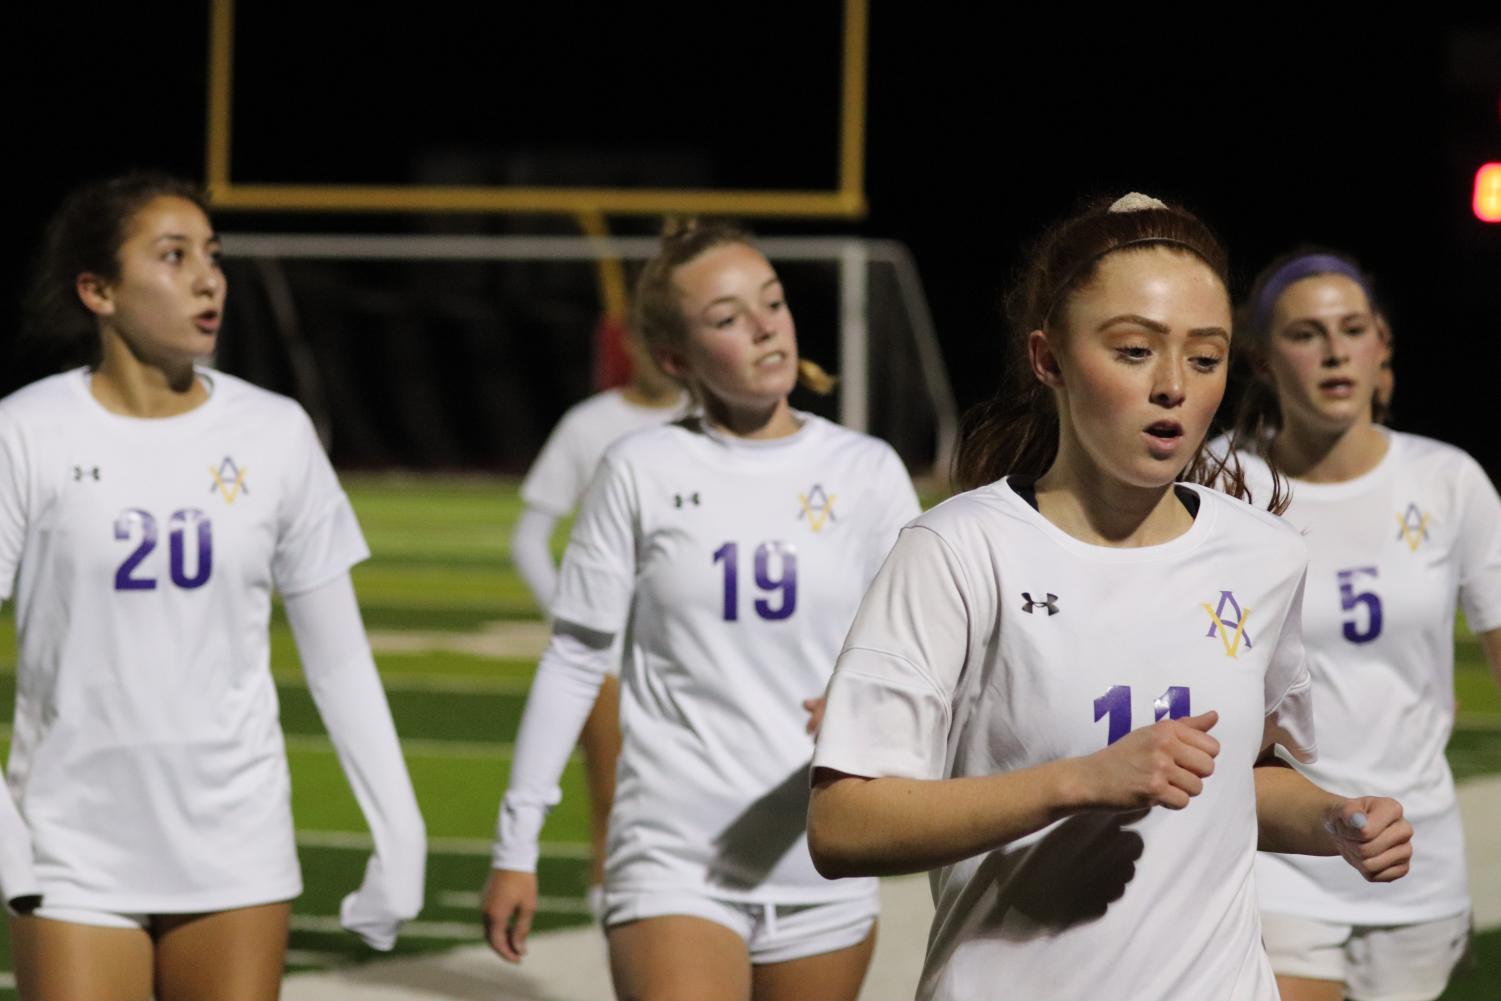 Amador+Varsity+Girls+Soccer+kick+off+the+first+half+of+the+season+undefeated